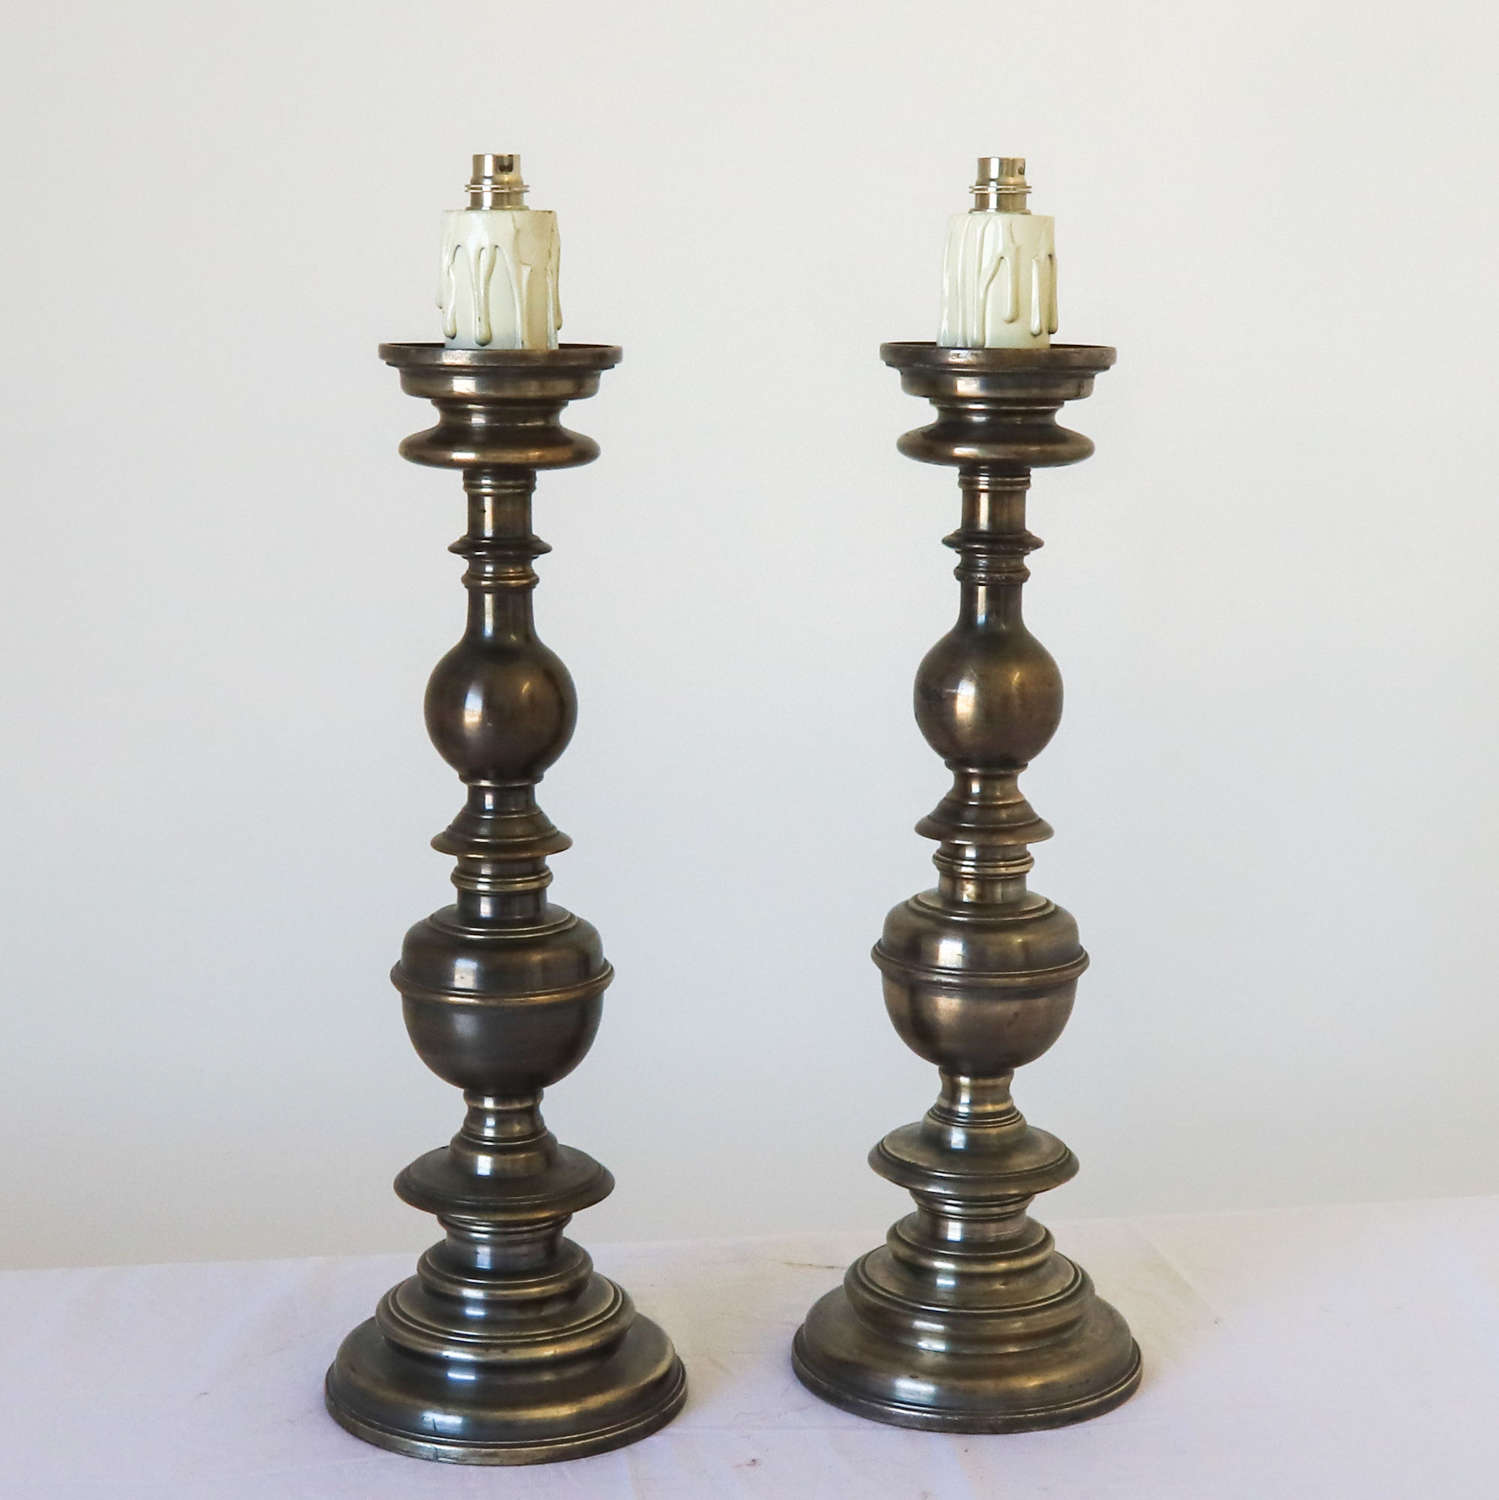 Pair of silvered brass candlesticks later converted to lamps